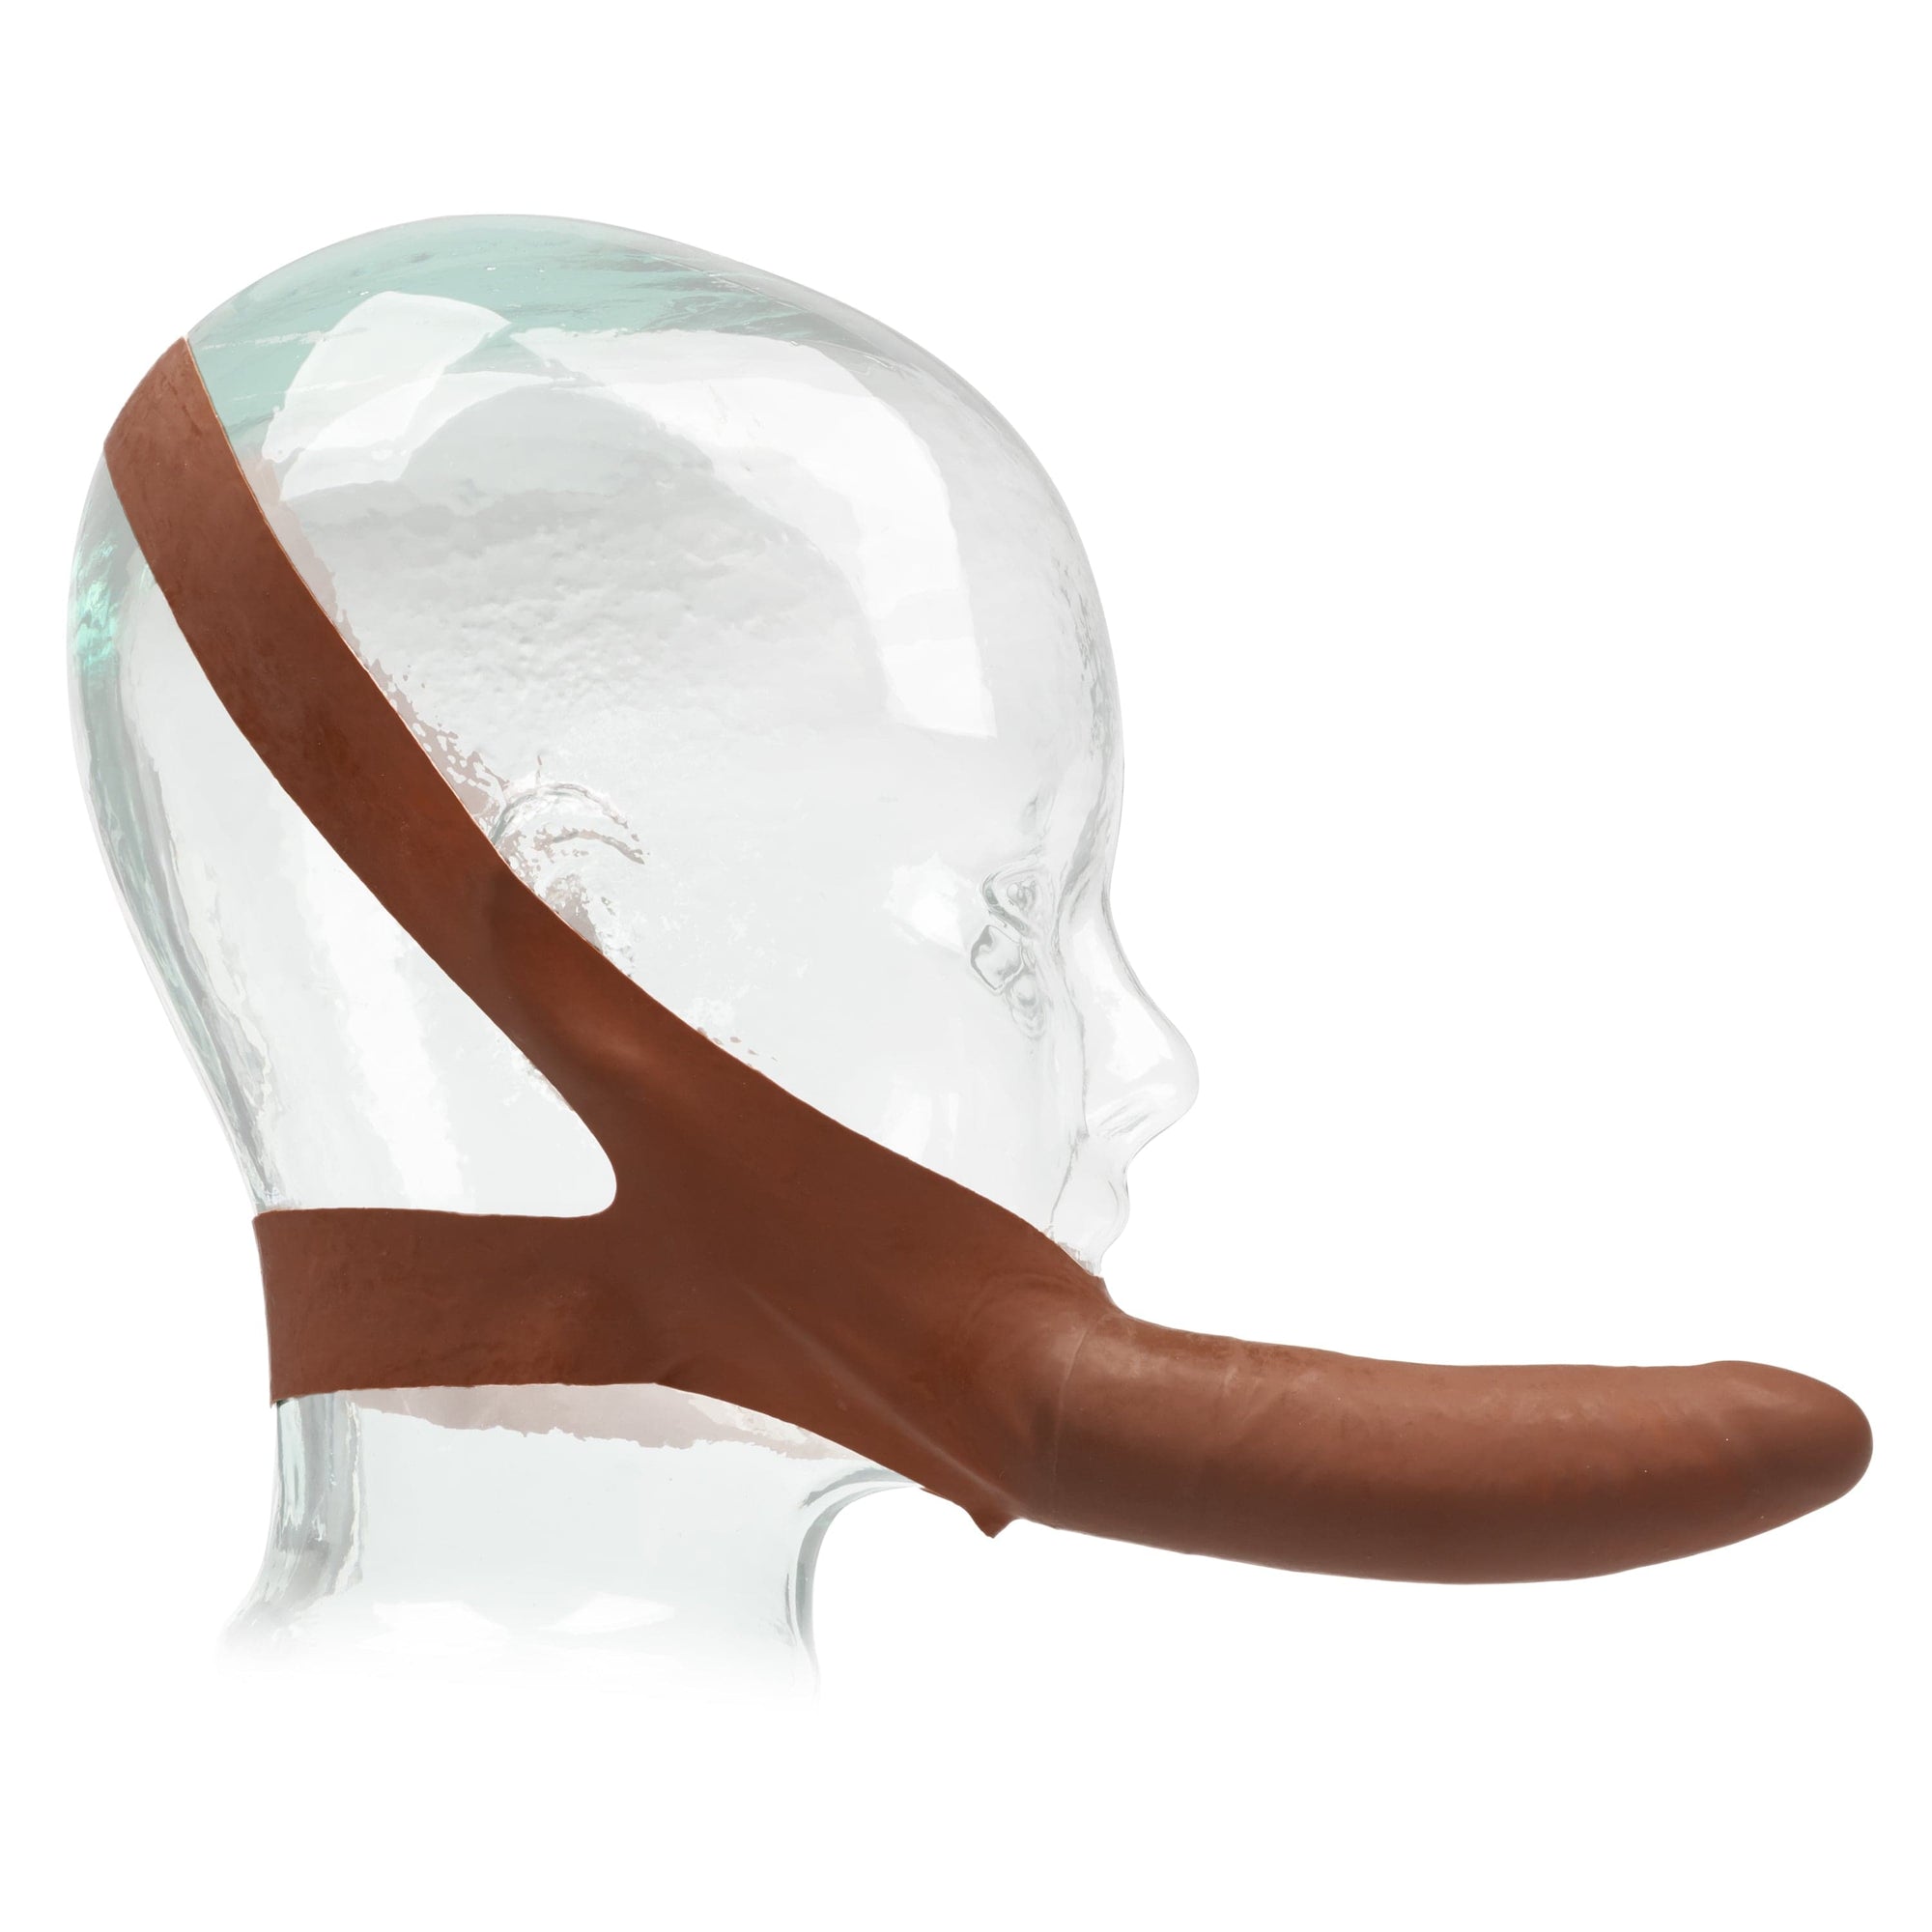 California Exotics - The Original Accommodator Latex Dong Mouth Strap On (Brown) Strap On with Non hollow Dildo for Female (Non Vibration) 716770101822 CherryAffairs